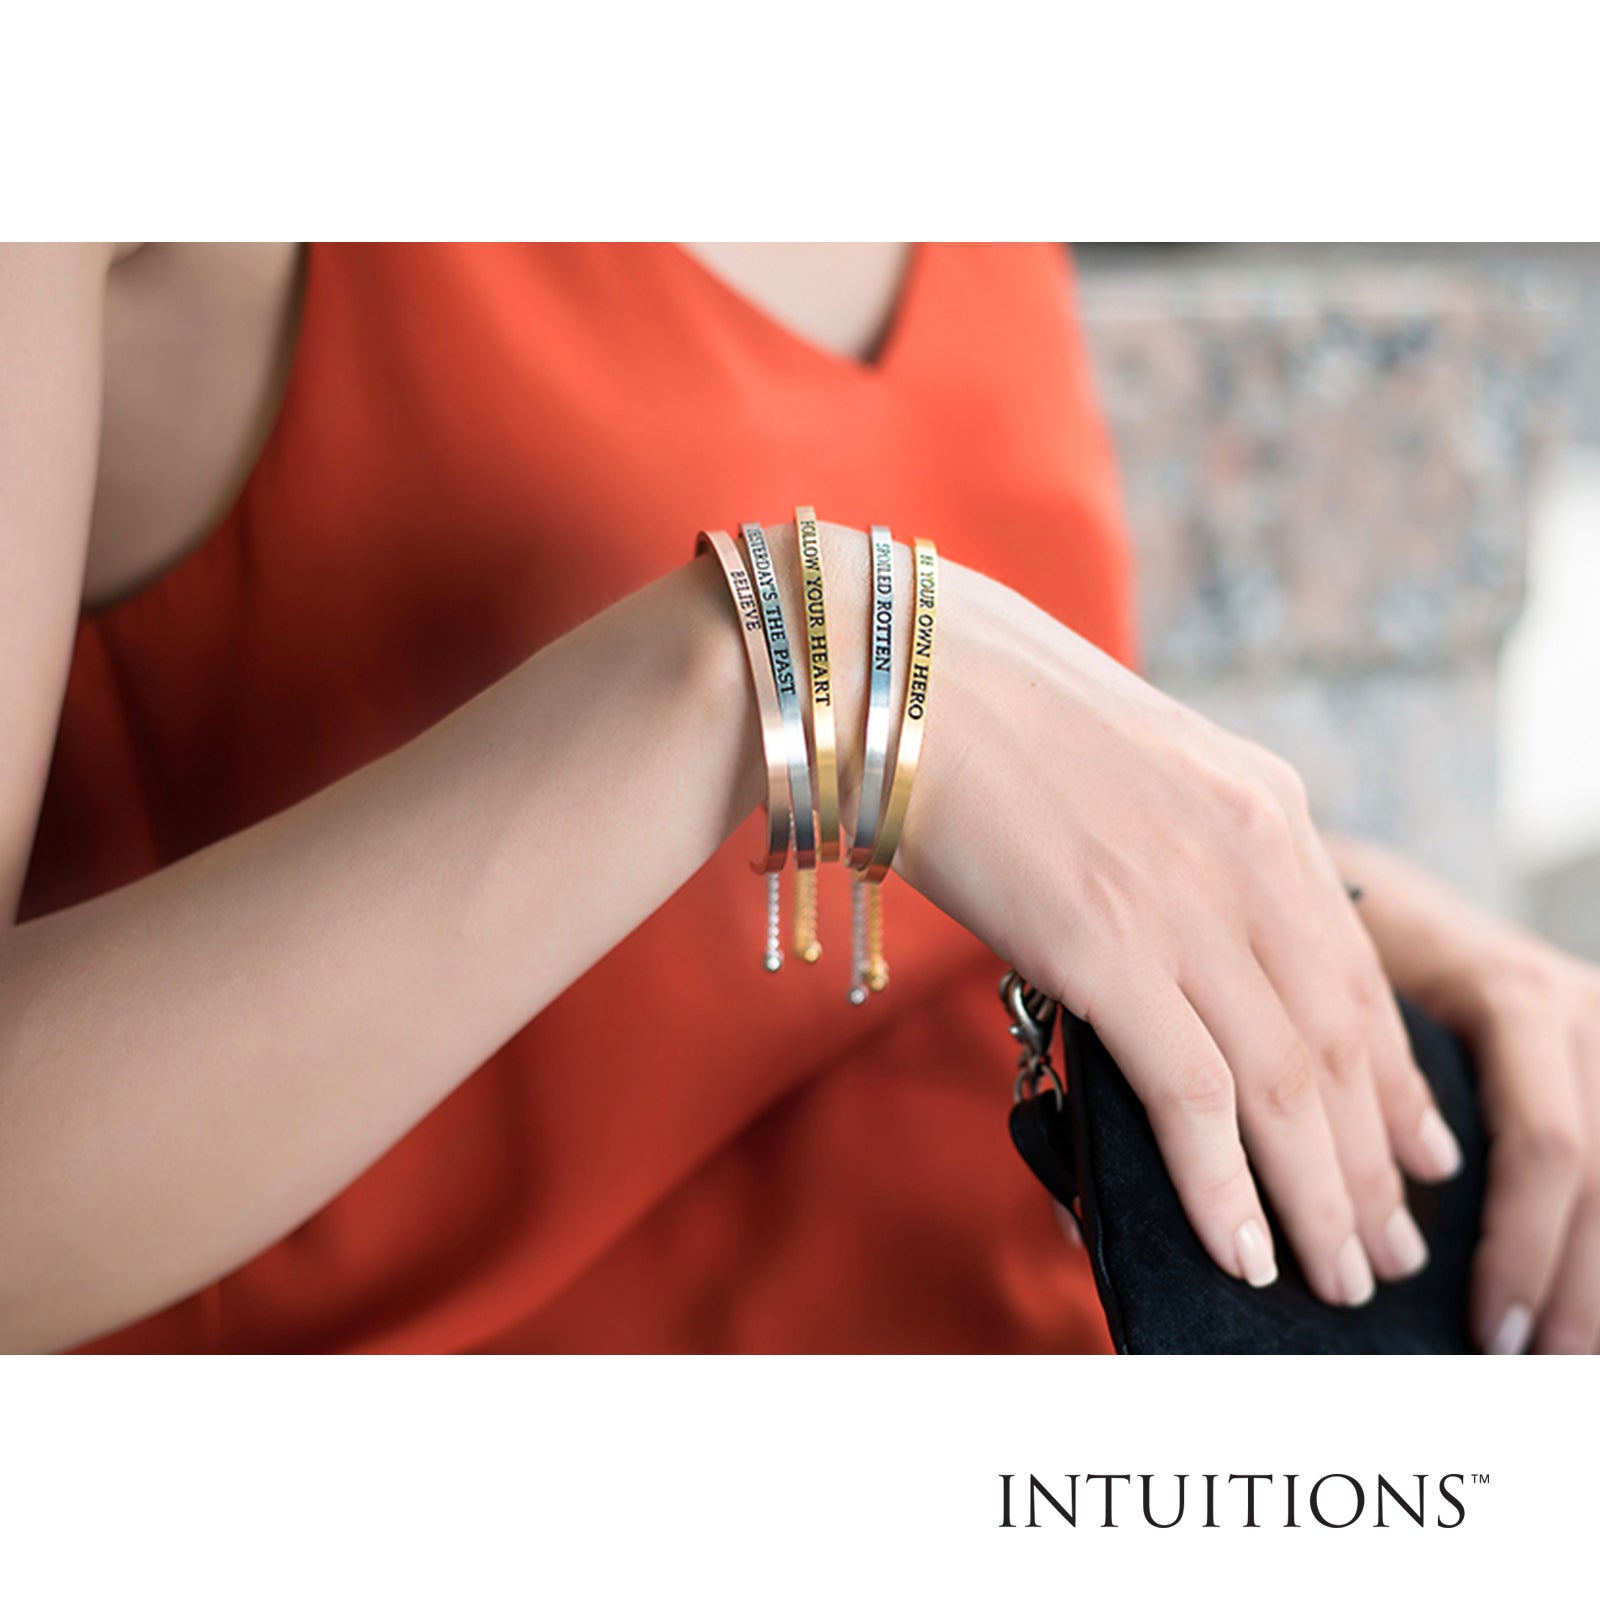 Intuitions Stainless Steel I’M A SURVIVOR Diamond Accent Cuff Bangle Bracelet fine designer jewelry for men and women